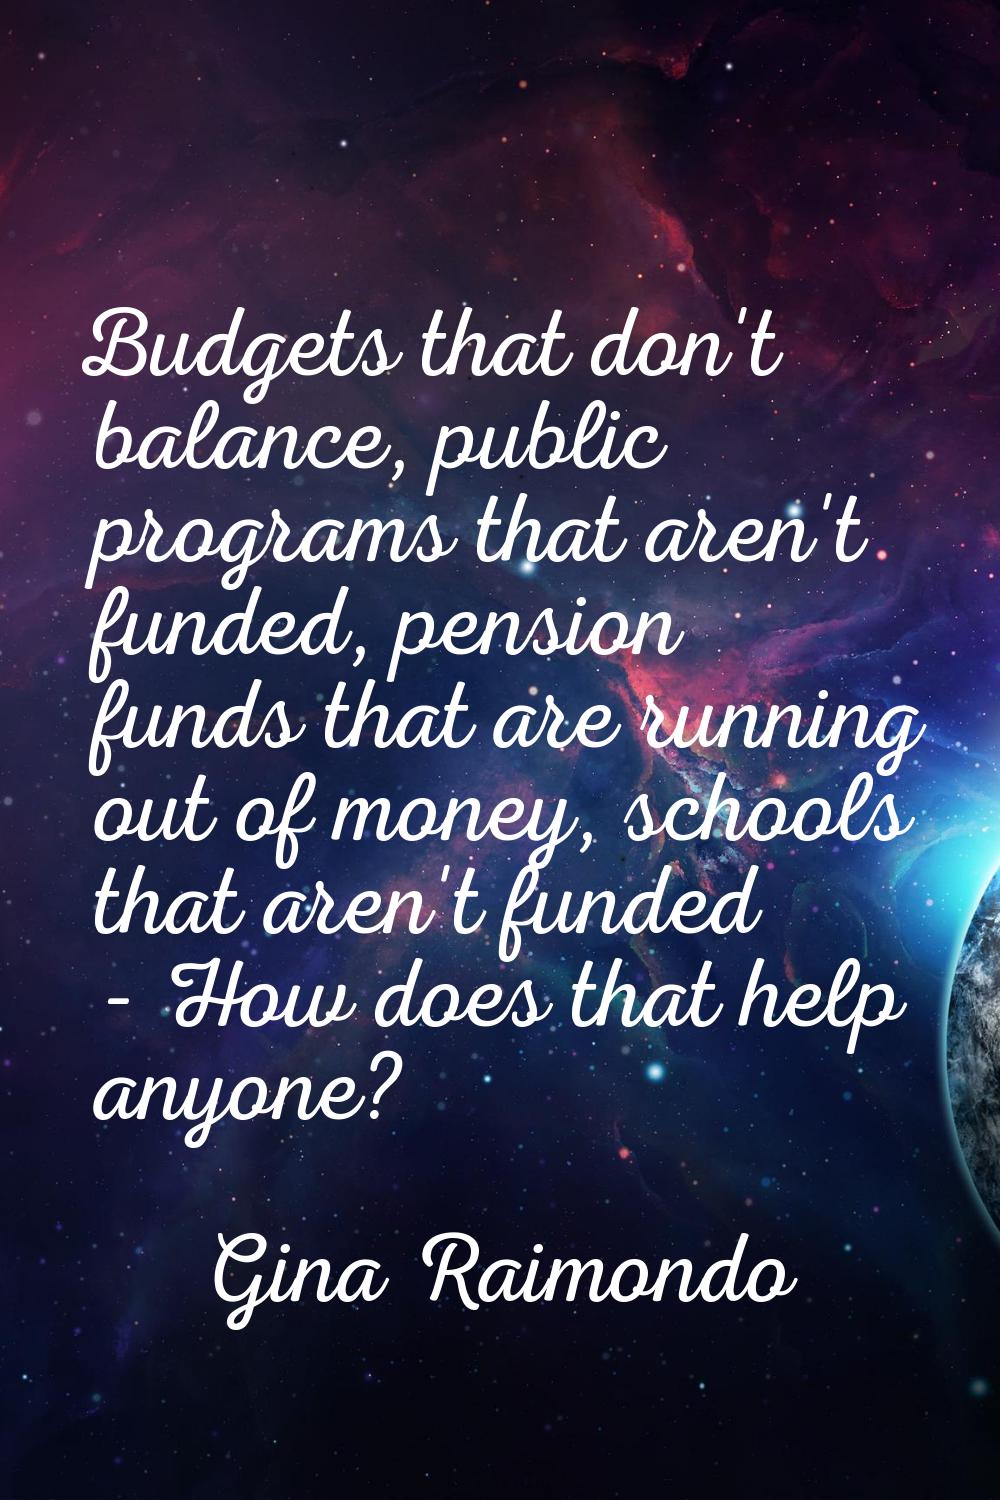 Budgets that don't balance, public programs that aren't funded, pension funds that are running out 